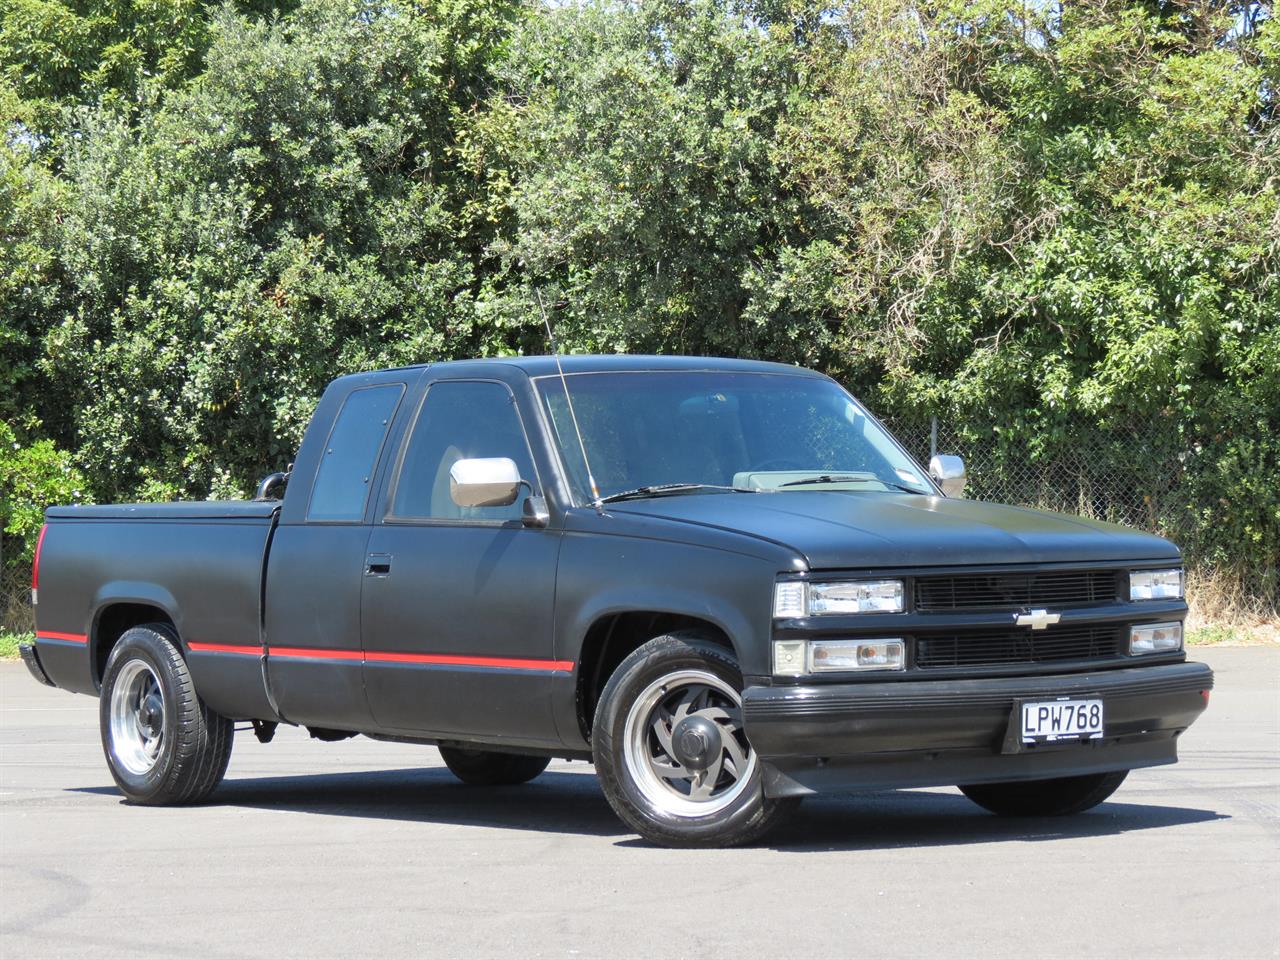 NZC 1994 Chevrolet Silverado just arrived to Auckland